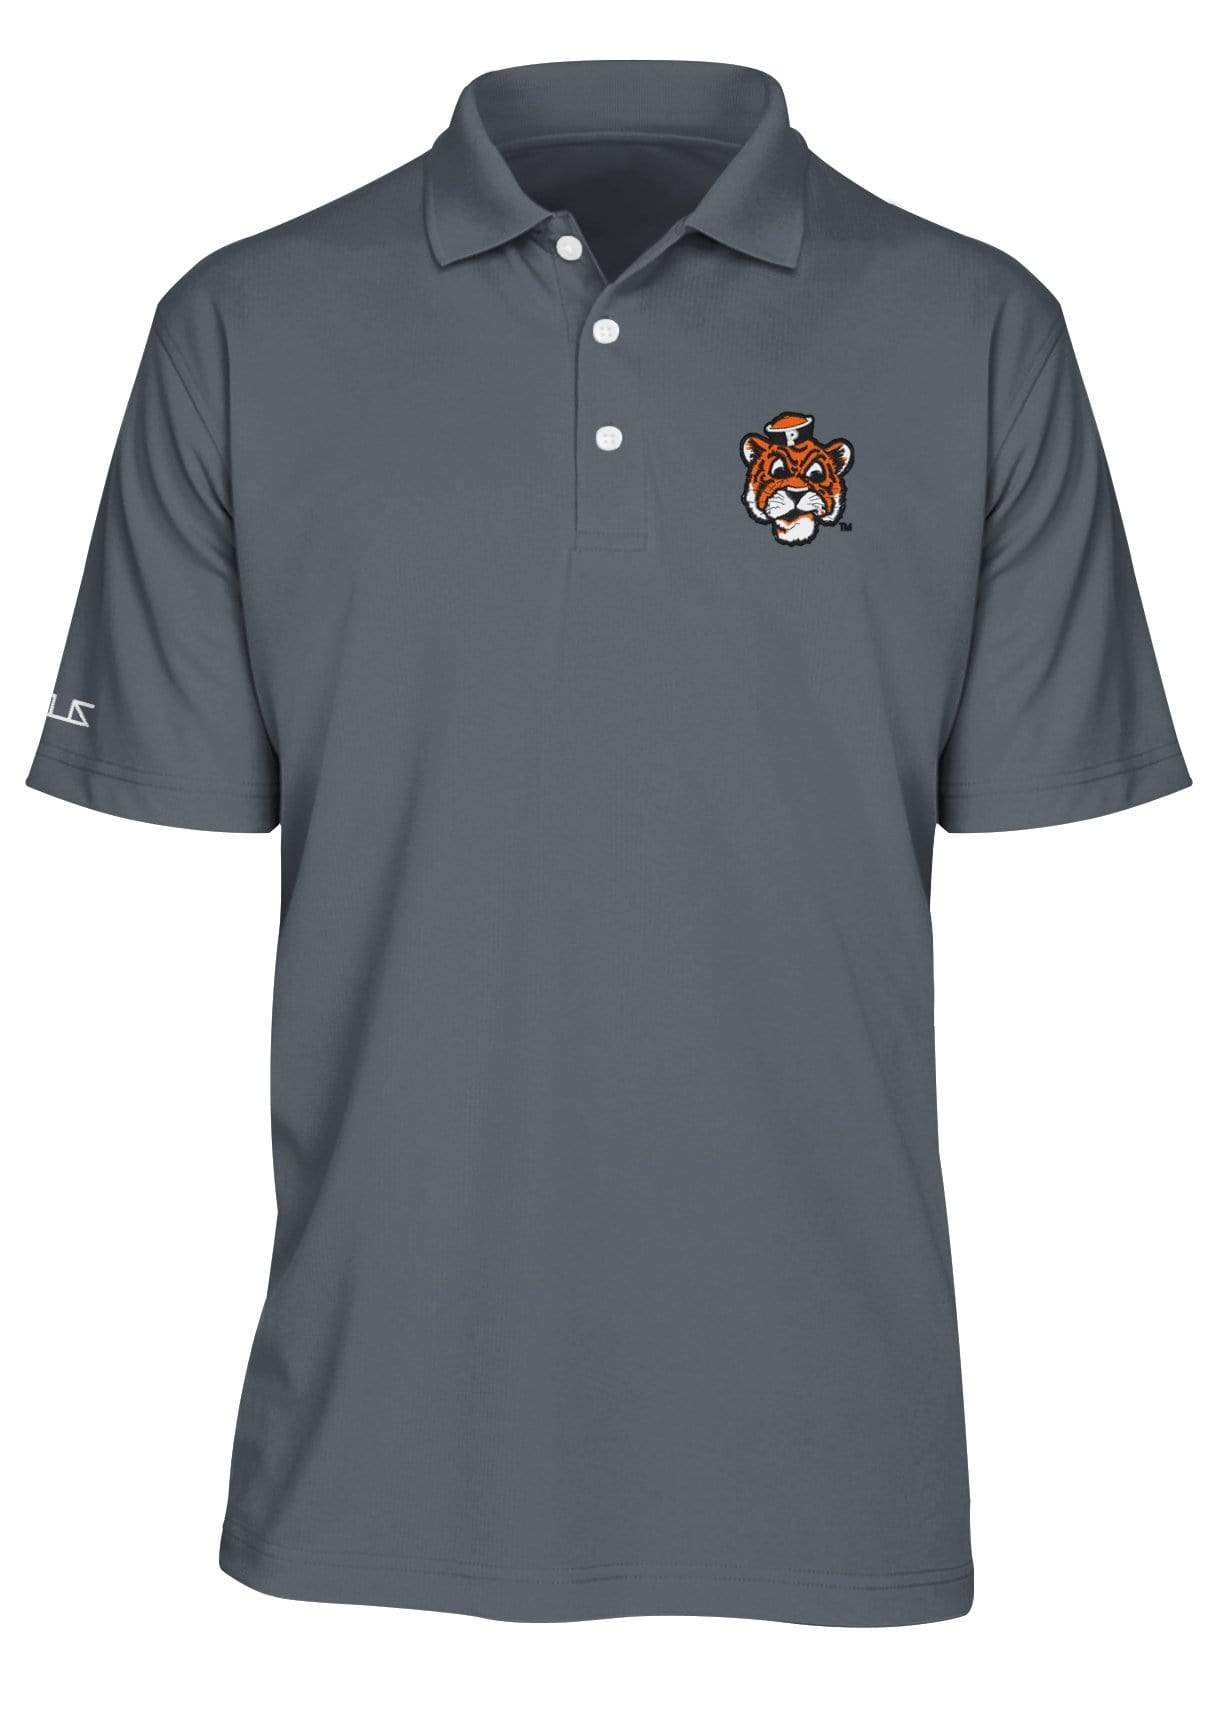 University of the Pacific Tigers Tommy Tiger Performance Polo Shirt by Zeus Collegiate